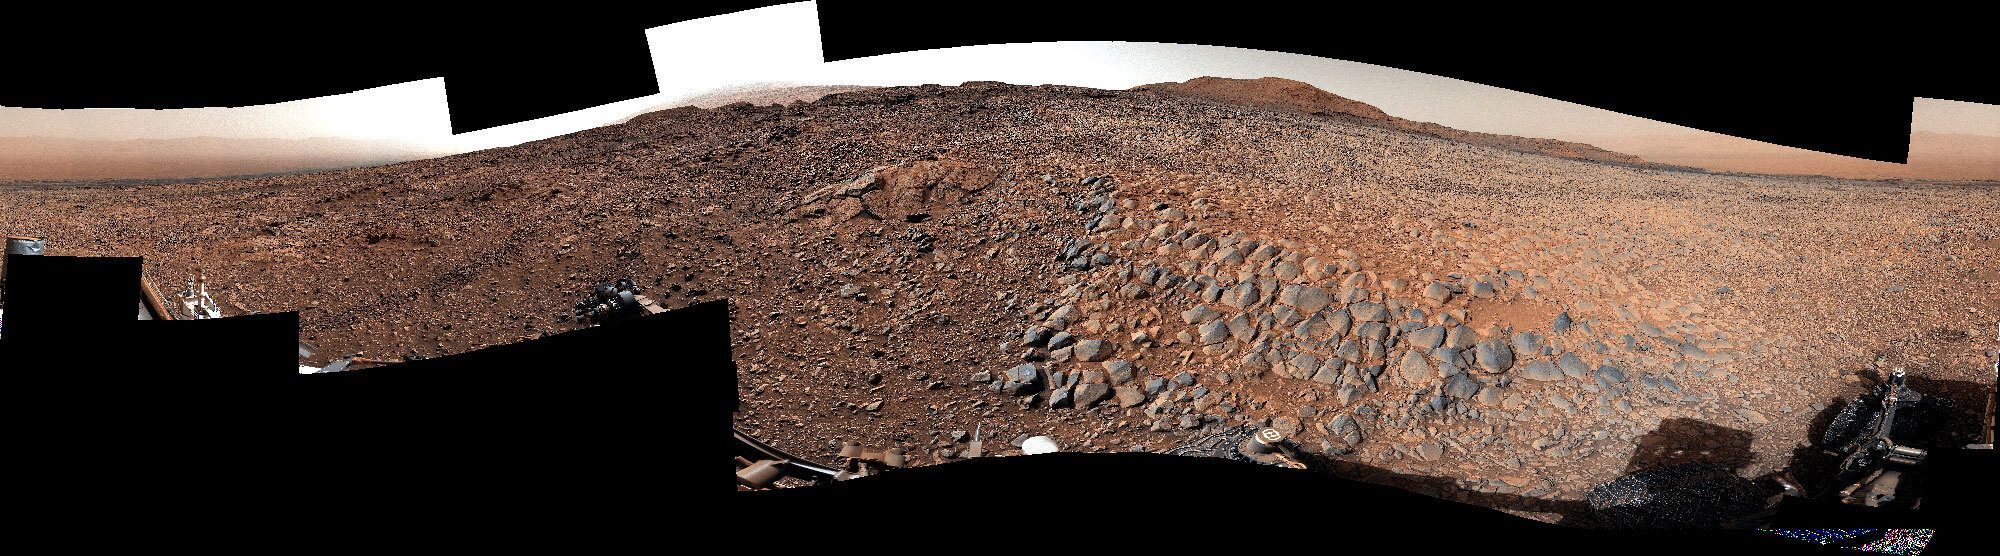 Read article: NASA's Curiosity Mars Rover Reroutes Away From 'Gator-Back' Rocks